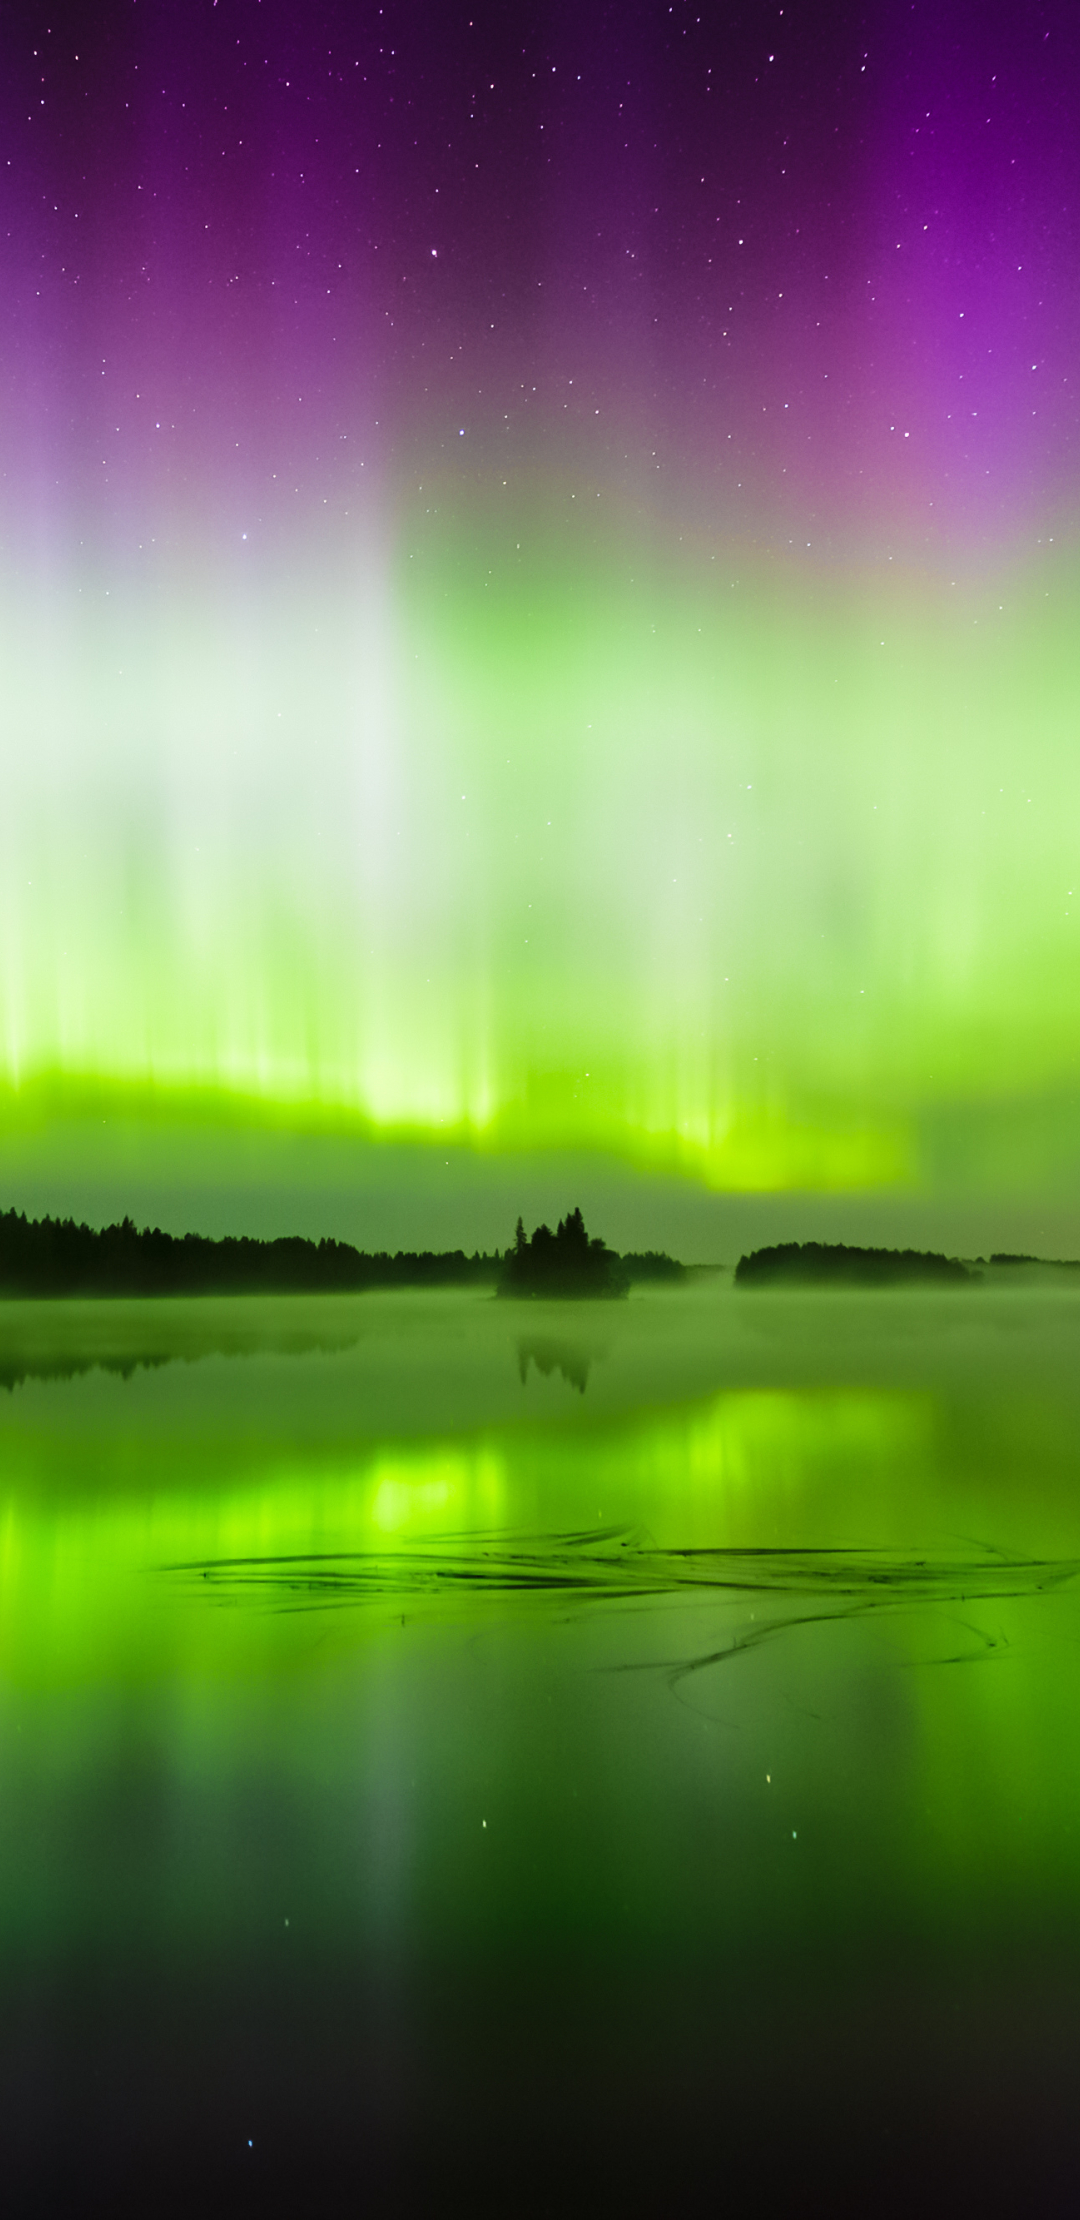 1080x22 4k Aurora 1080x22 Resolution Wallpaper Hd Nature 4k Wallpapers Images Photos And Background